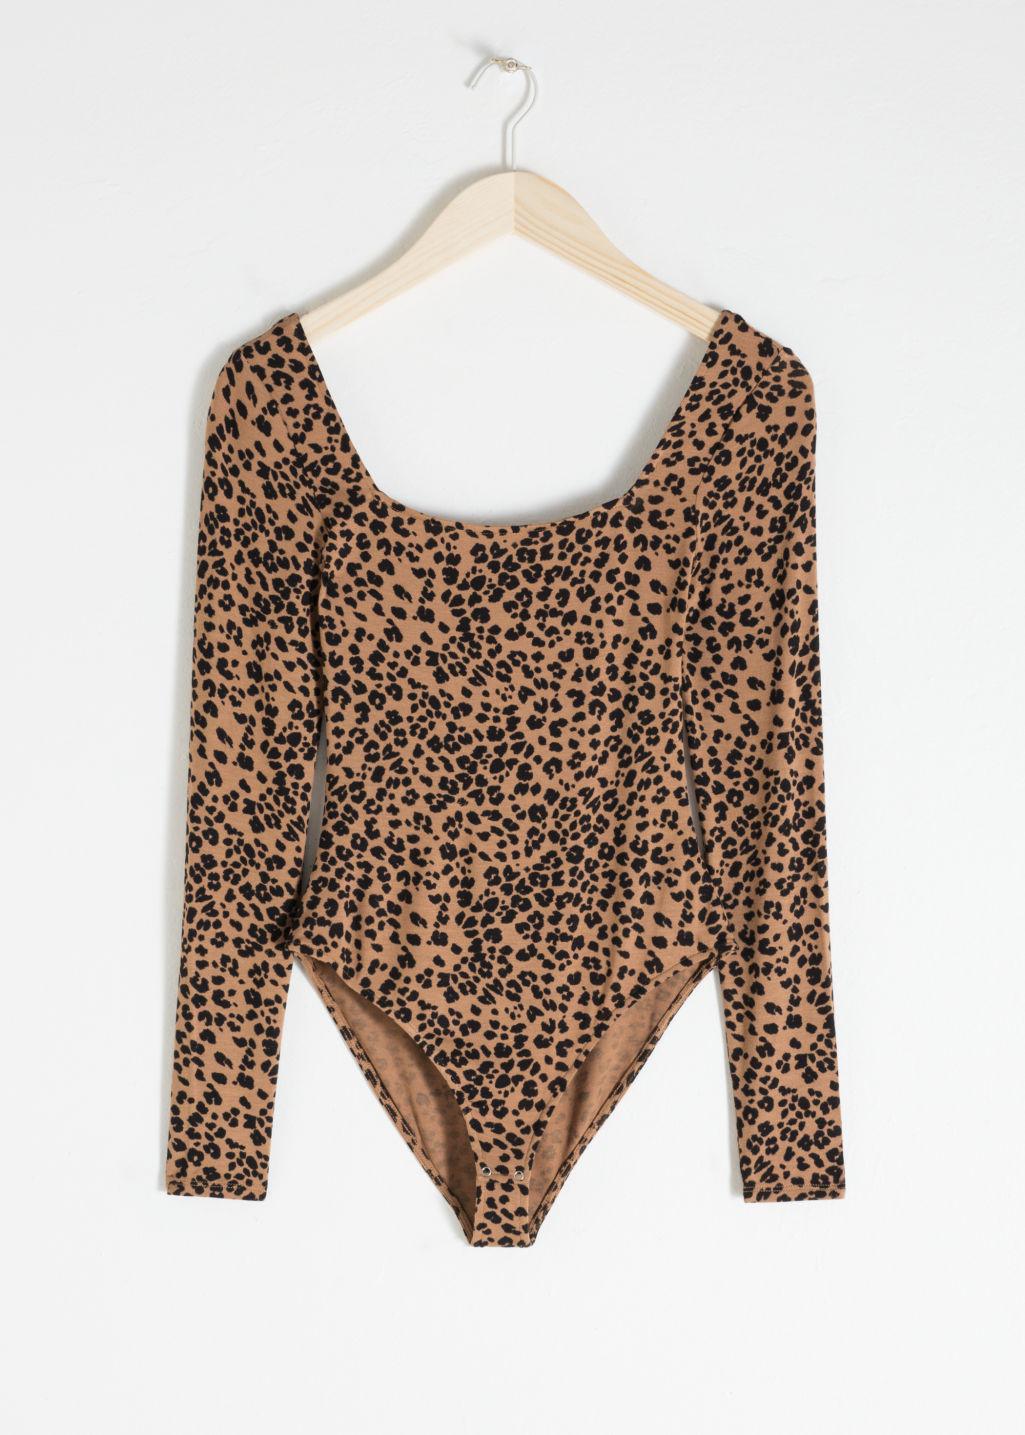 & Other Stories Long Sleeve Leopard Bodysuit in Brown - Lyst